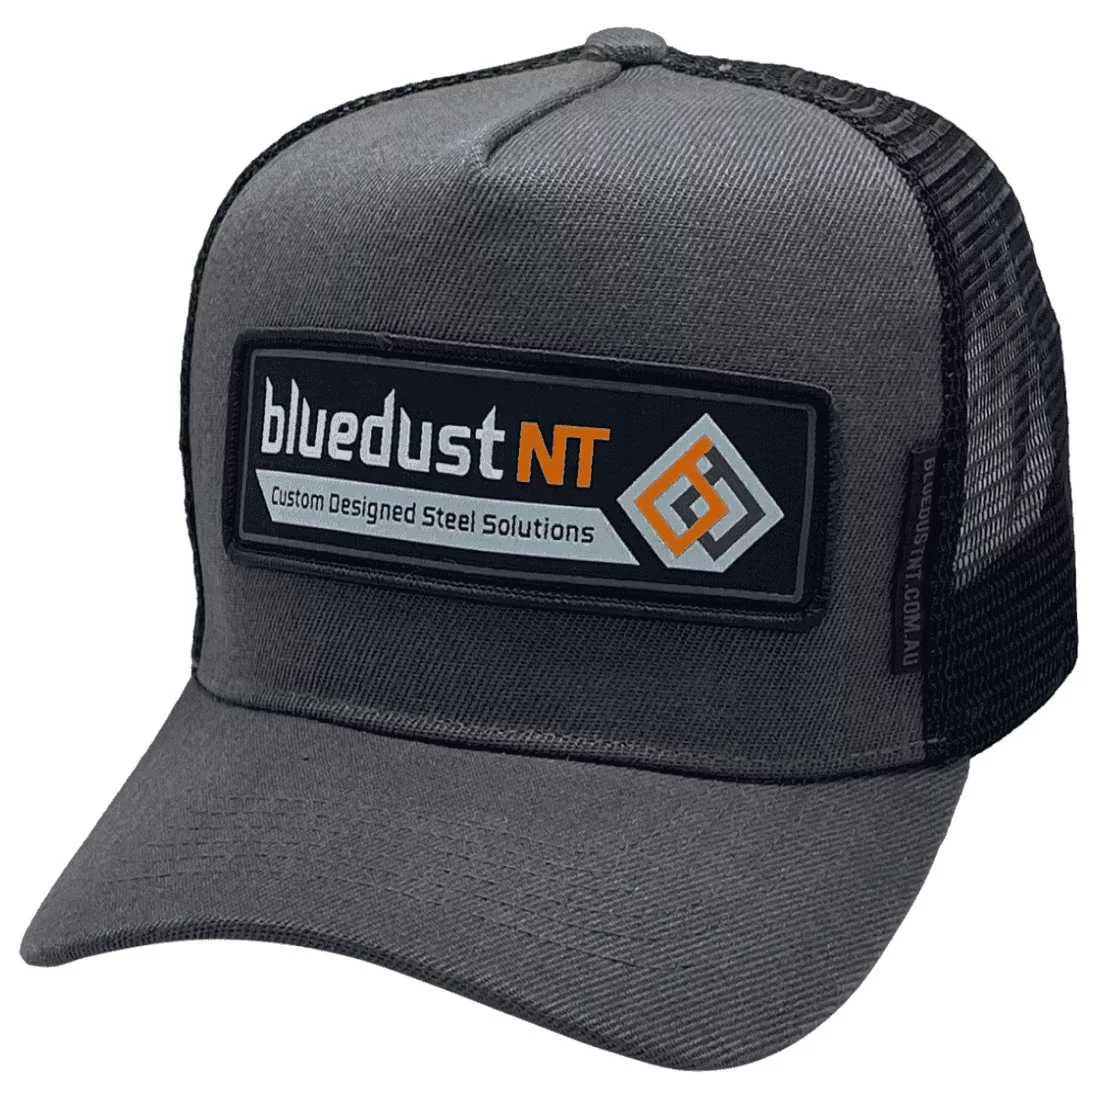 Bluedust NT Alice Springs NT HP  Original Midrange Aussie Trucker Hat with Australian Head Fit Crown Size with Double Side Bands